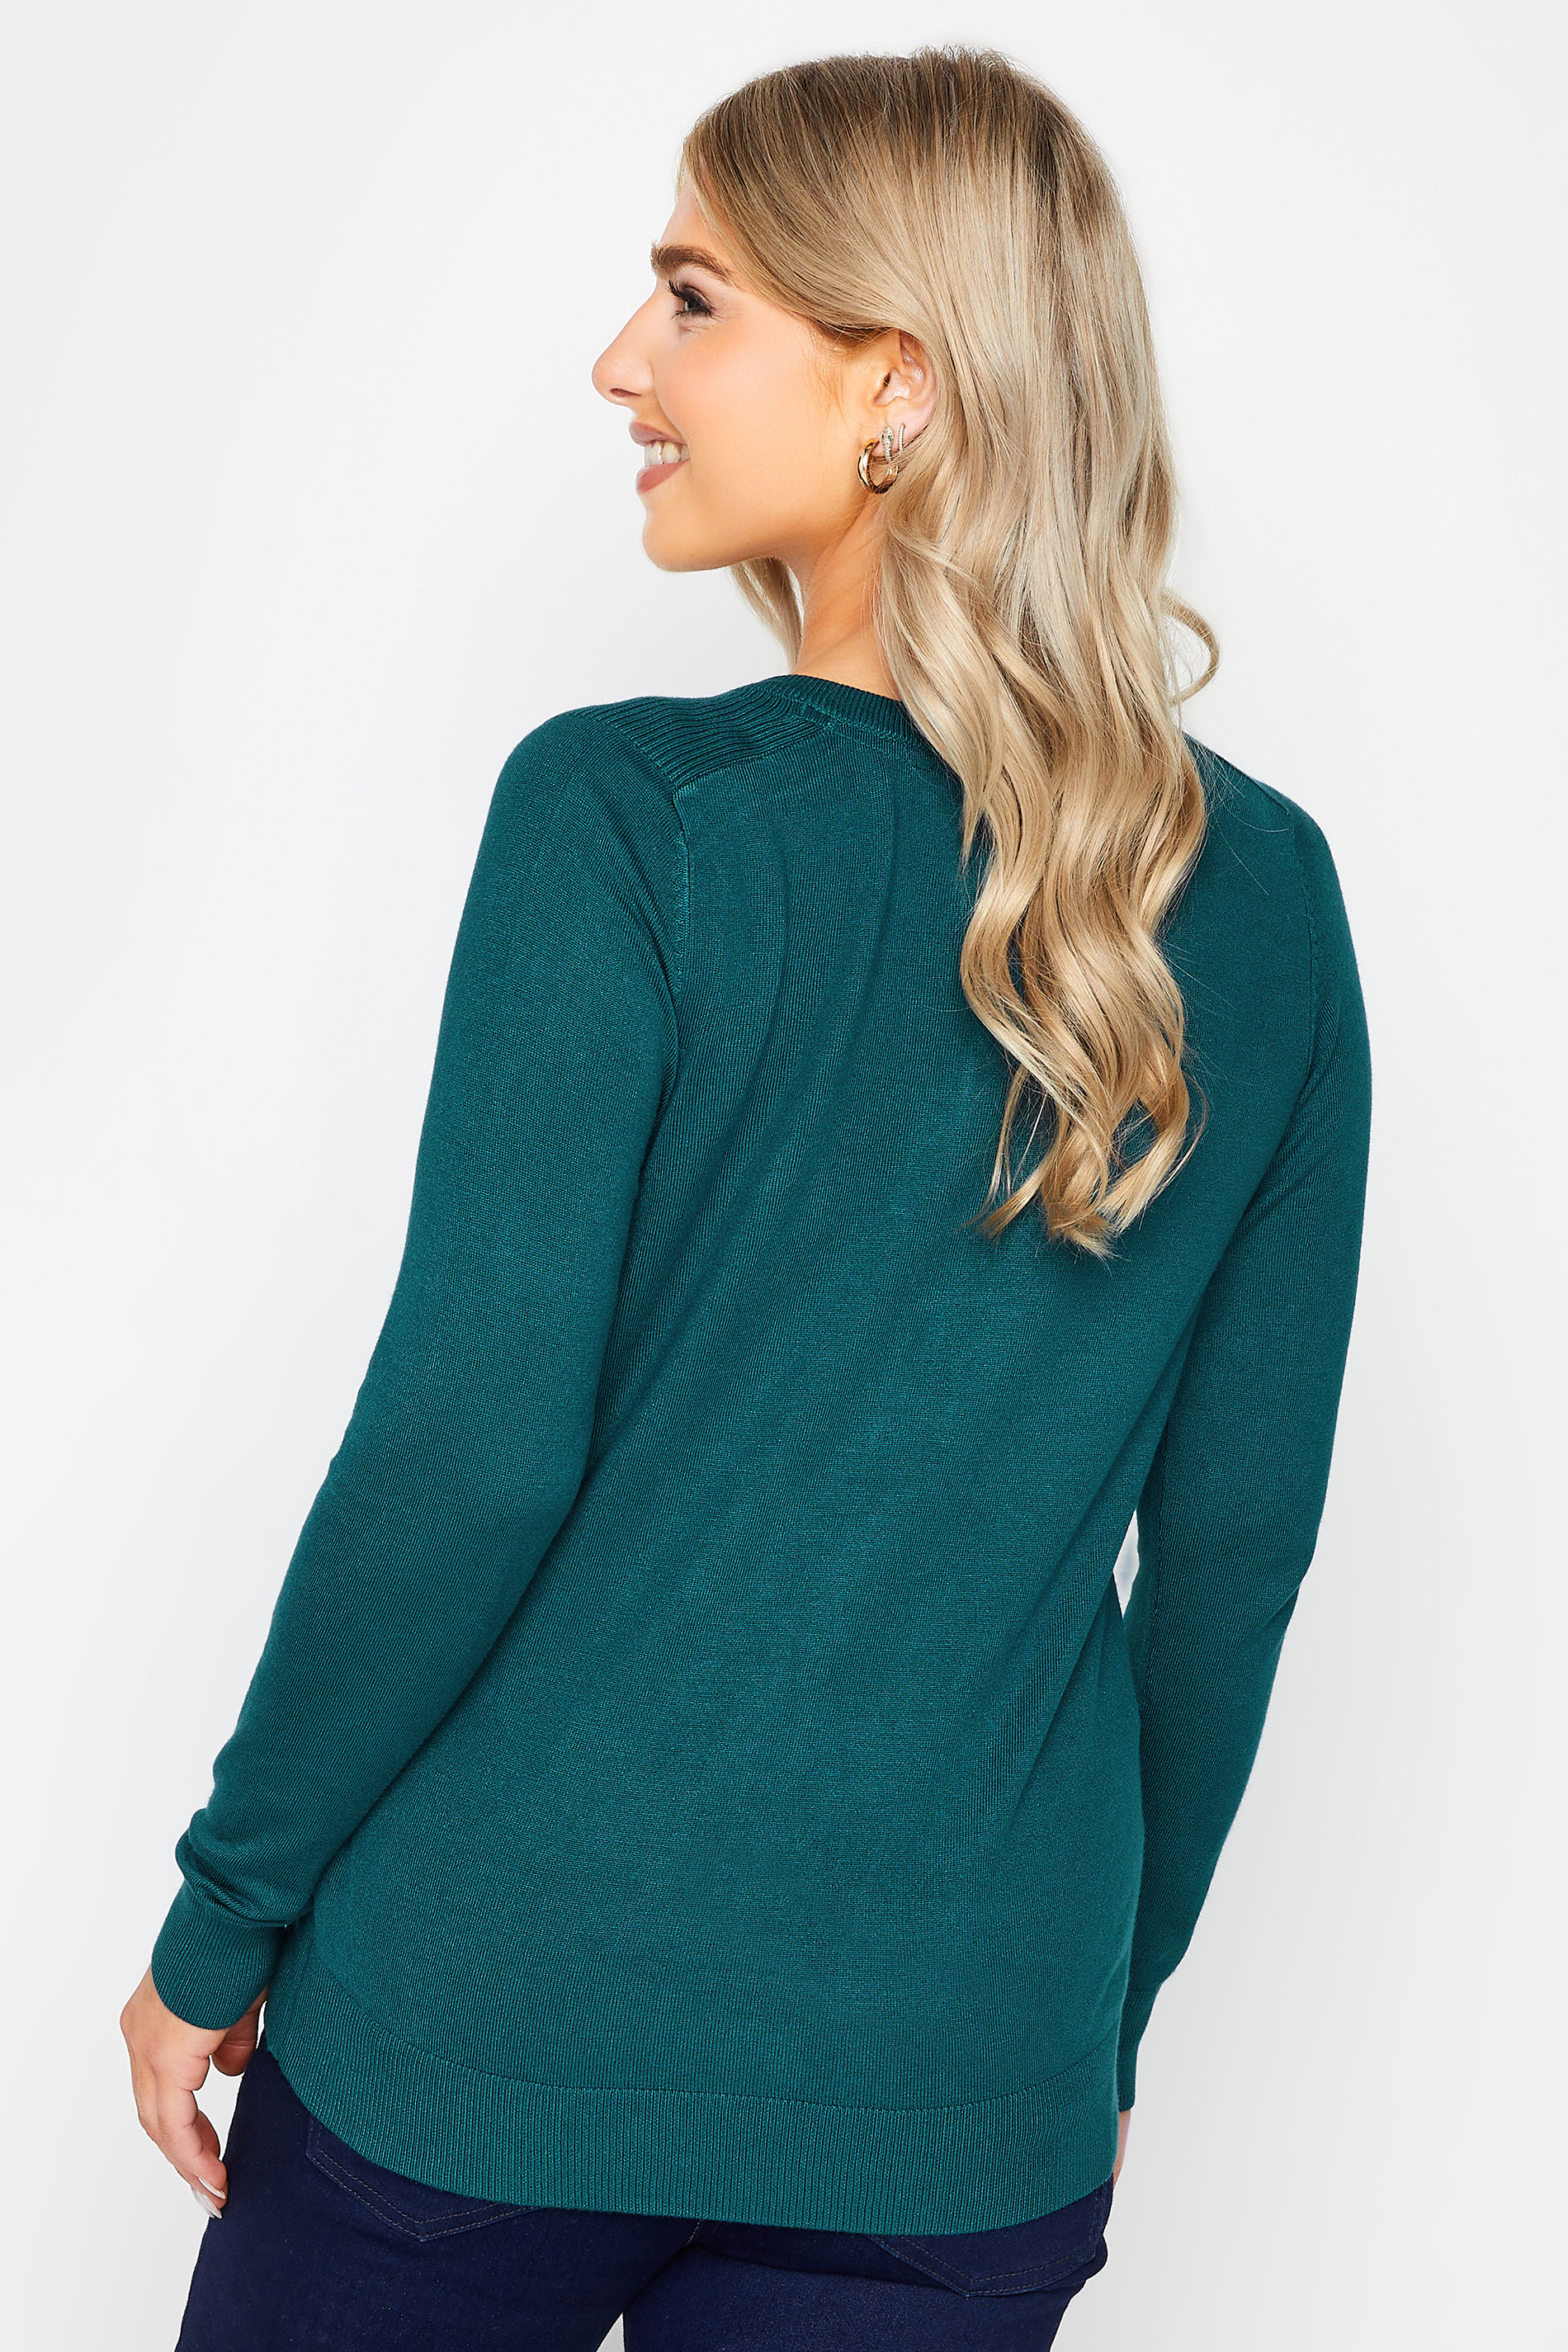 M&Co Teal Green Button Up Ribbed Shoulder Cardigan | M&Co 3